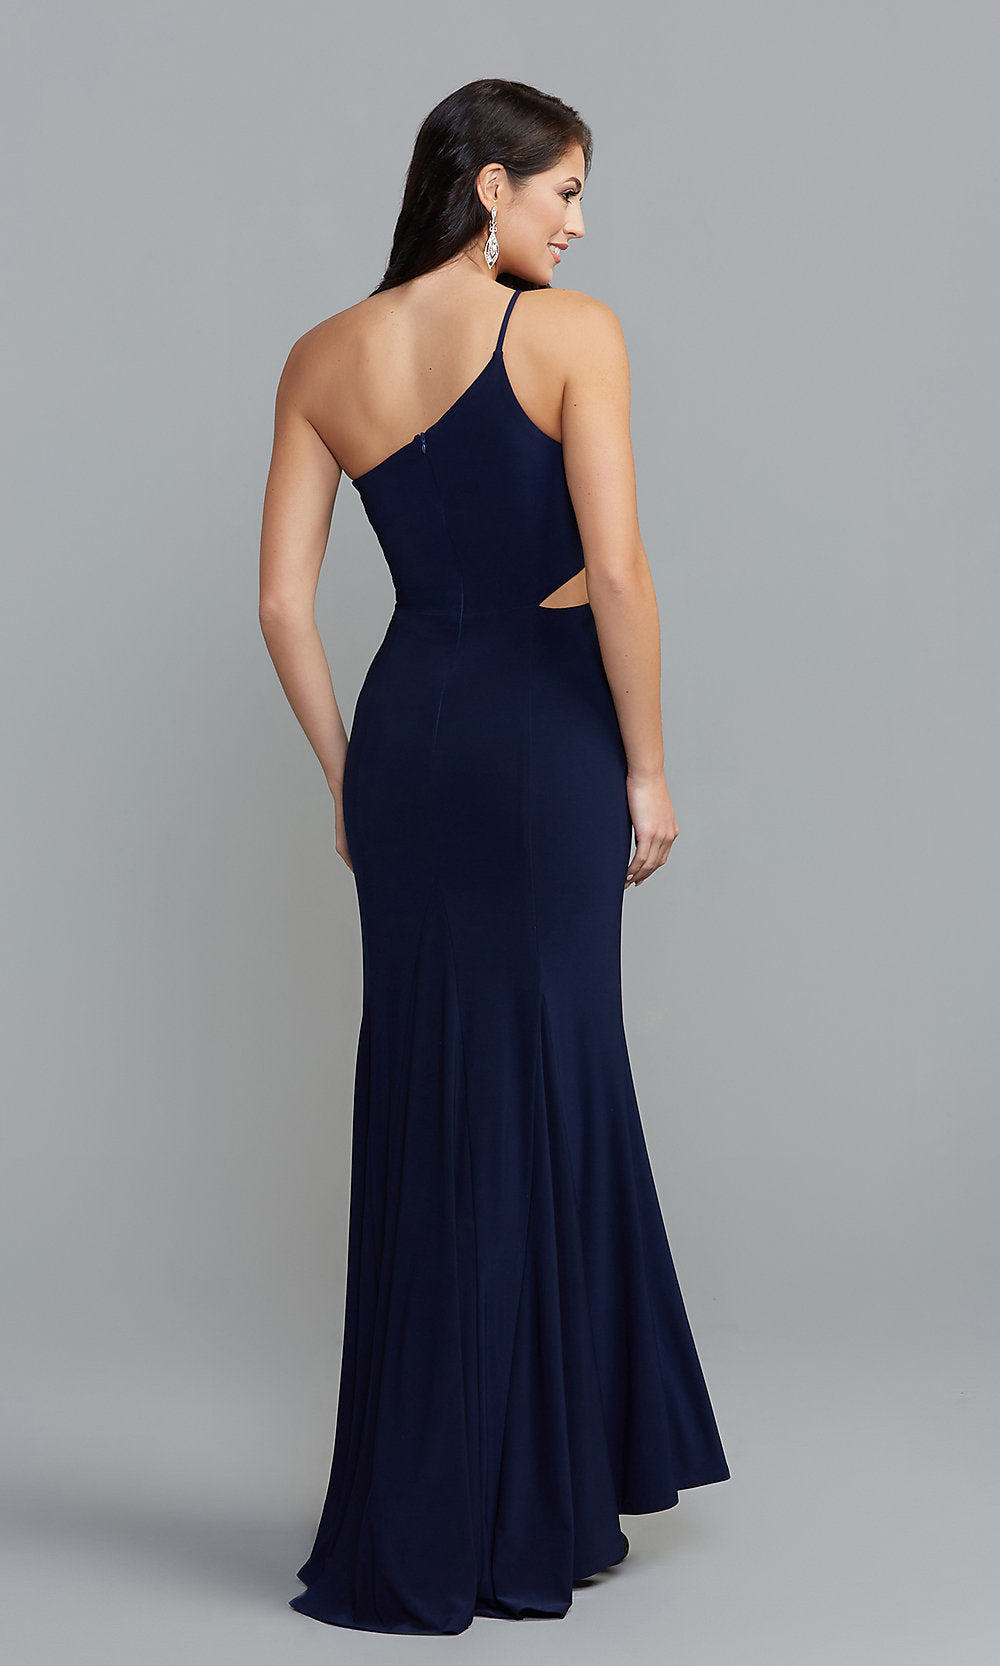 One-Shoulder Long Navy Blue Prom Dress by Jump